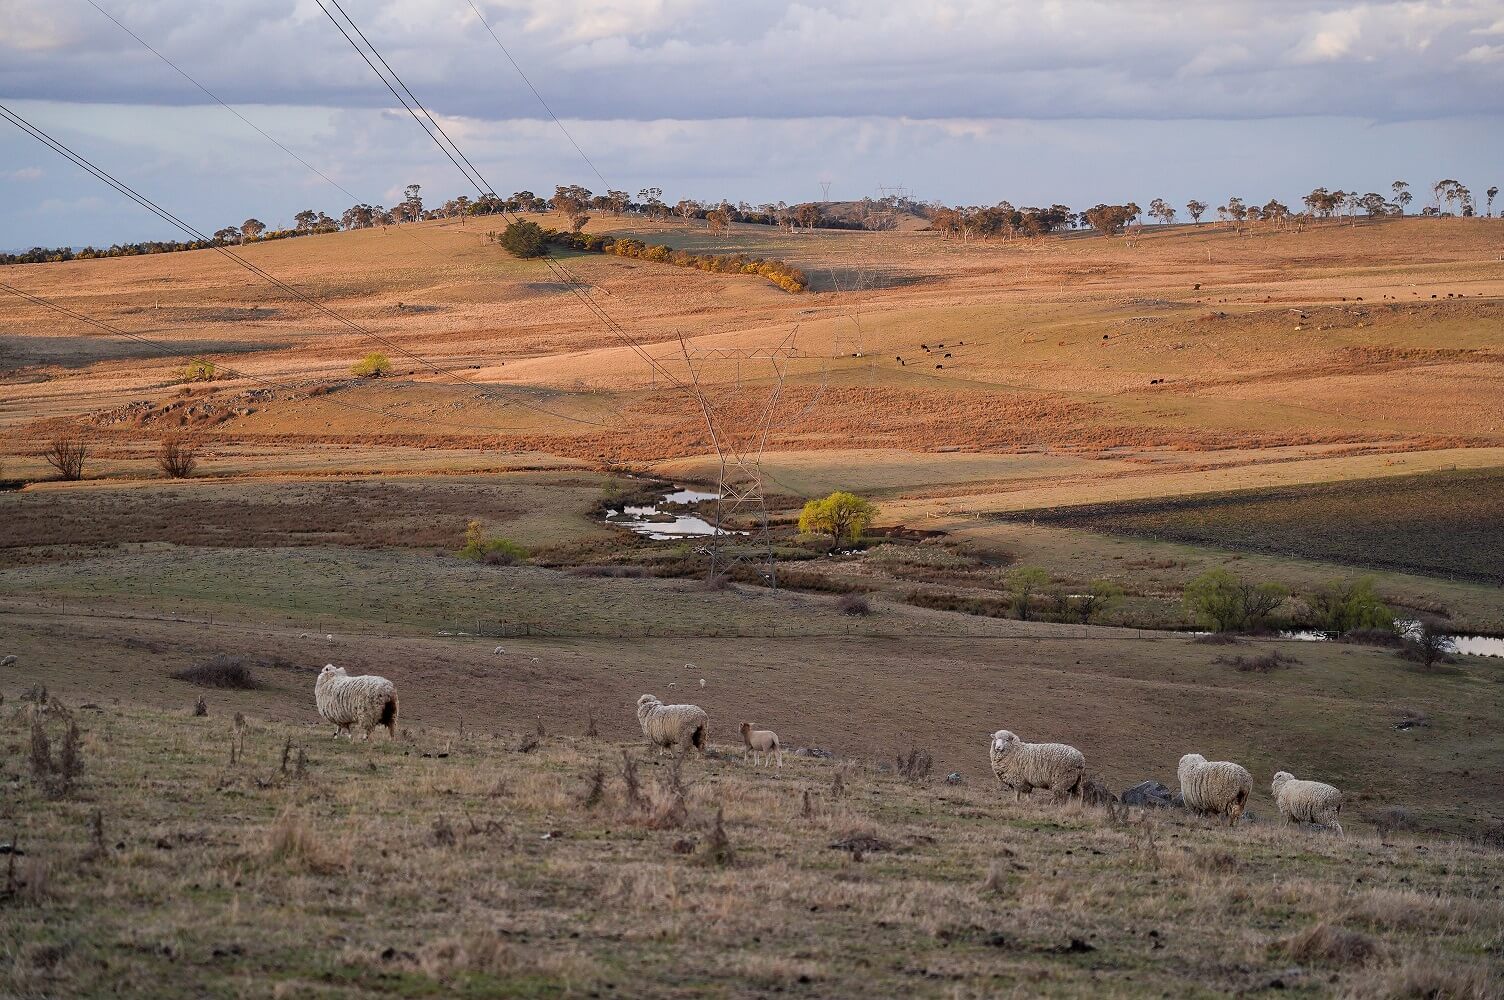 Transmission lines with sheep in paddock.